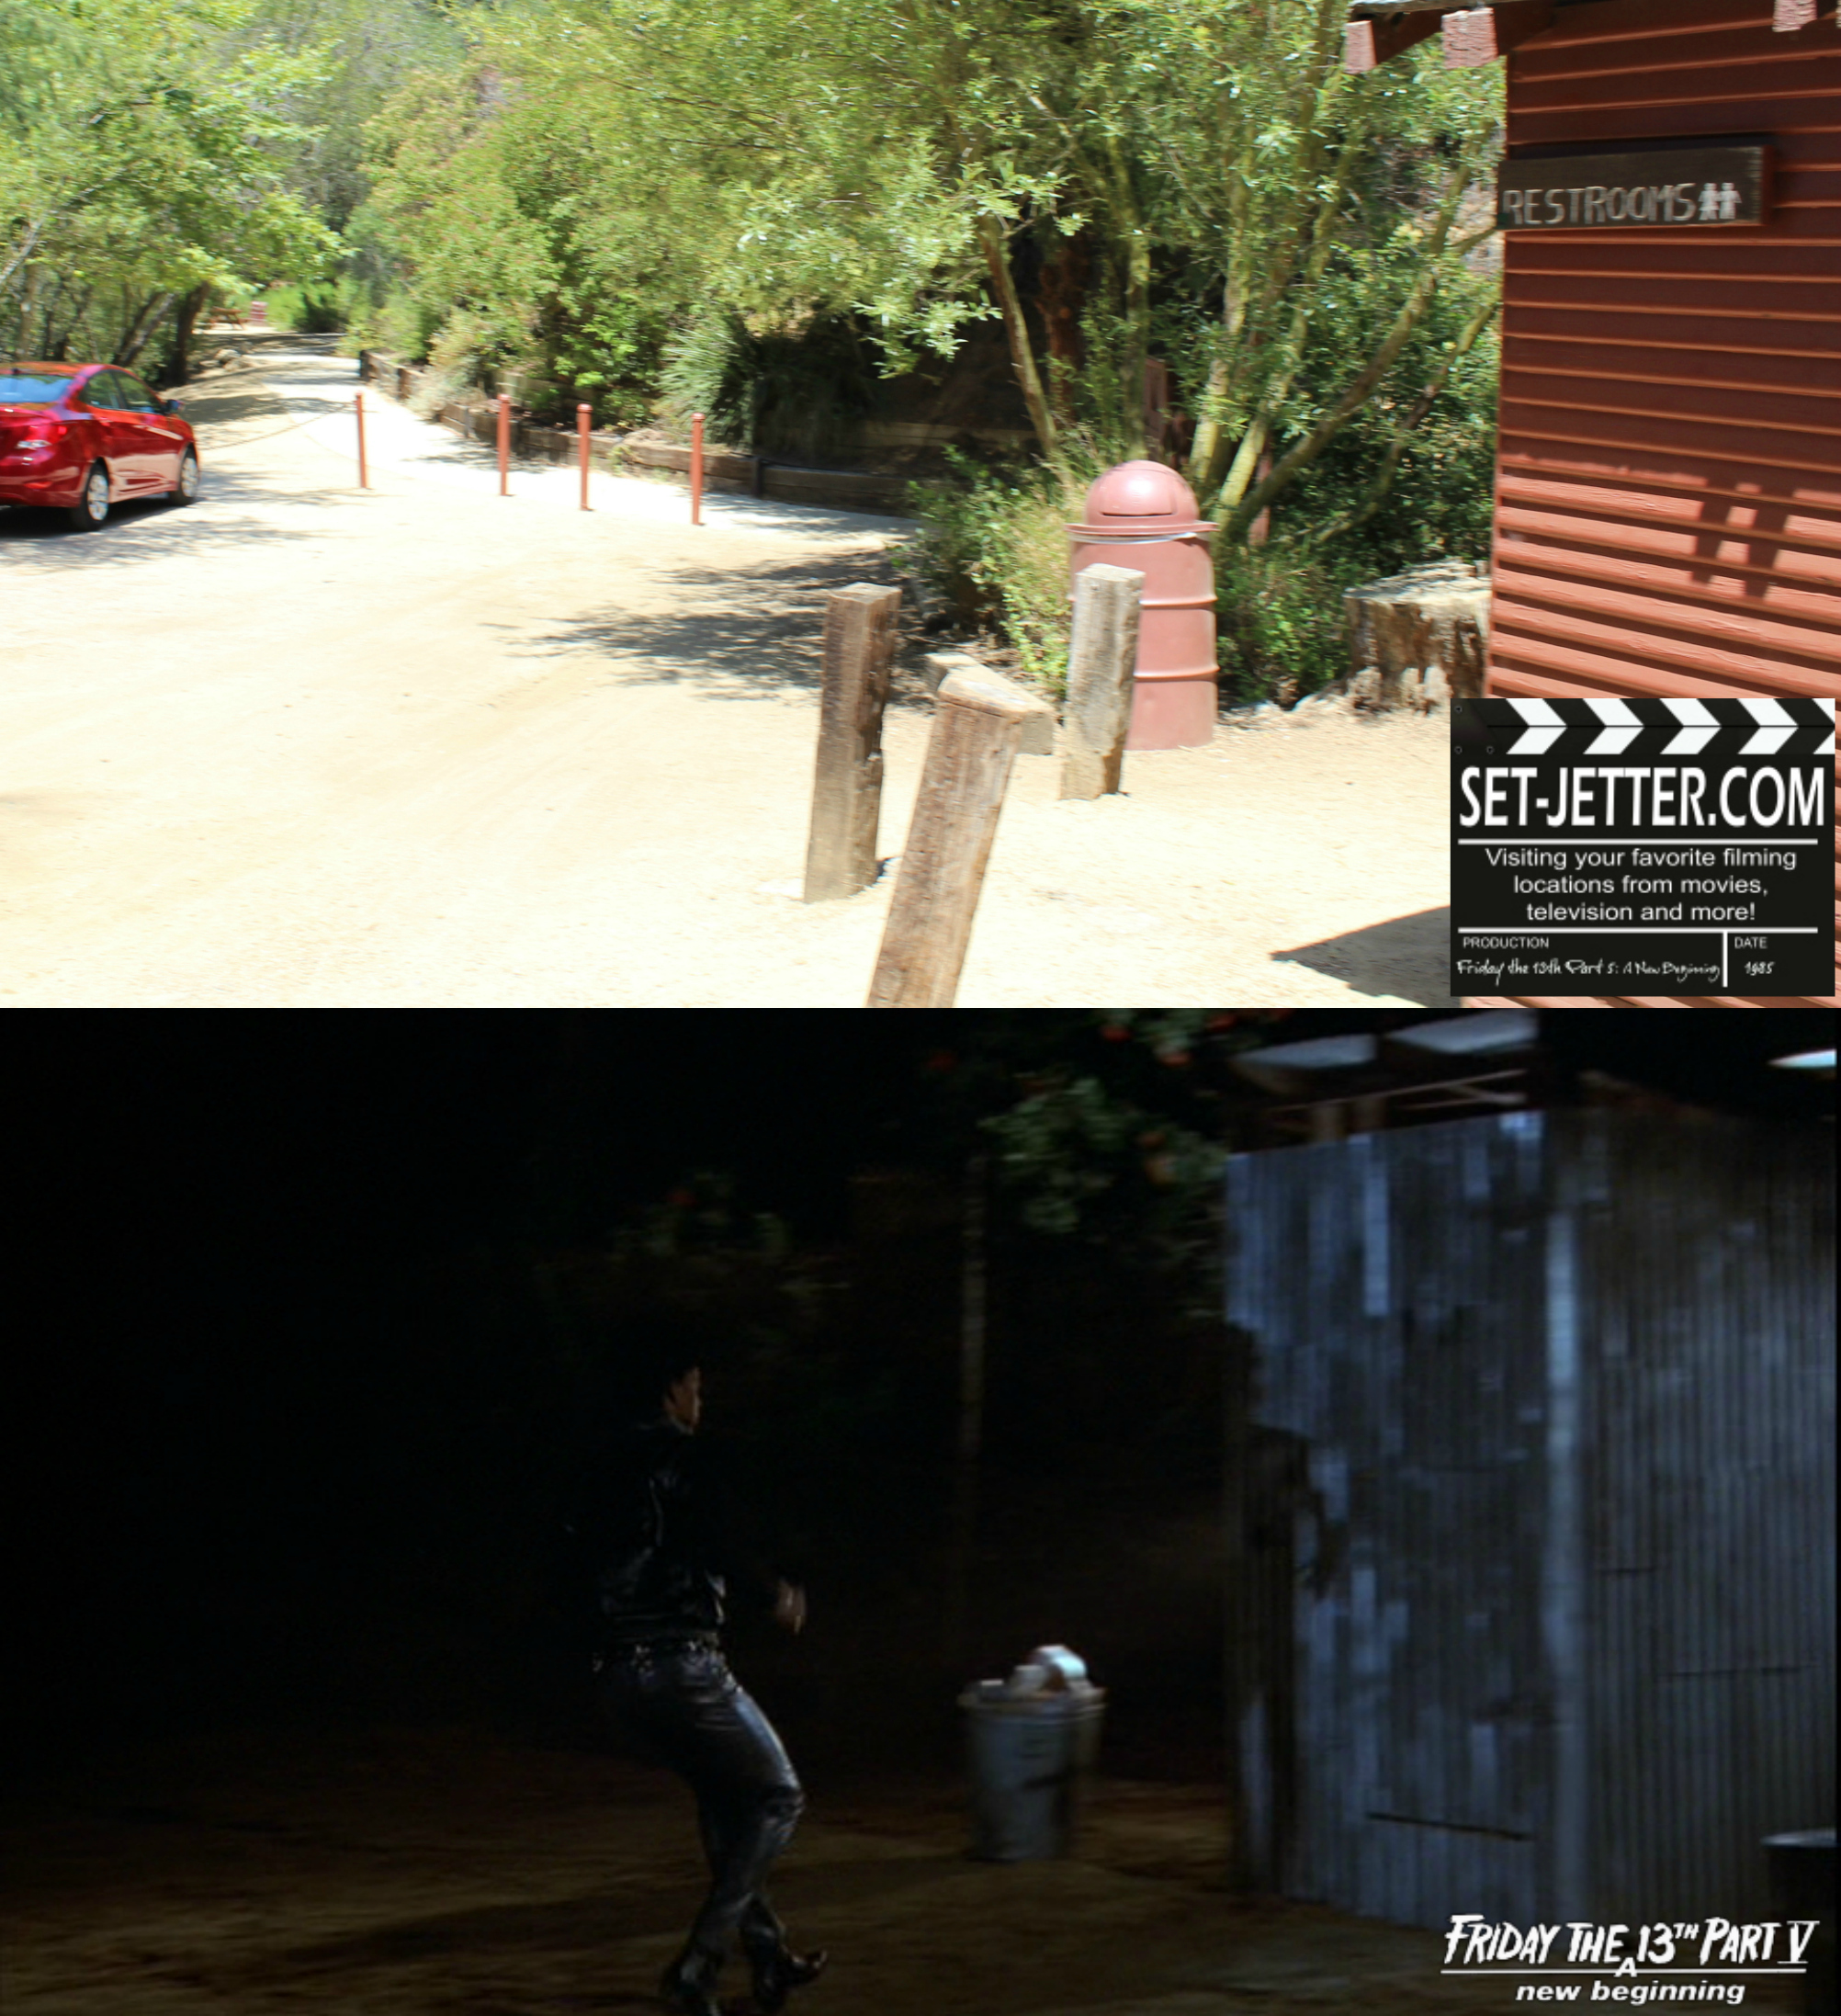 Friday the 13th Part V comparison 48.jpg